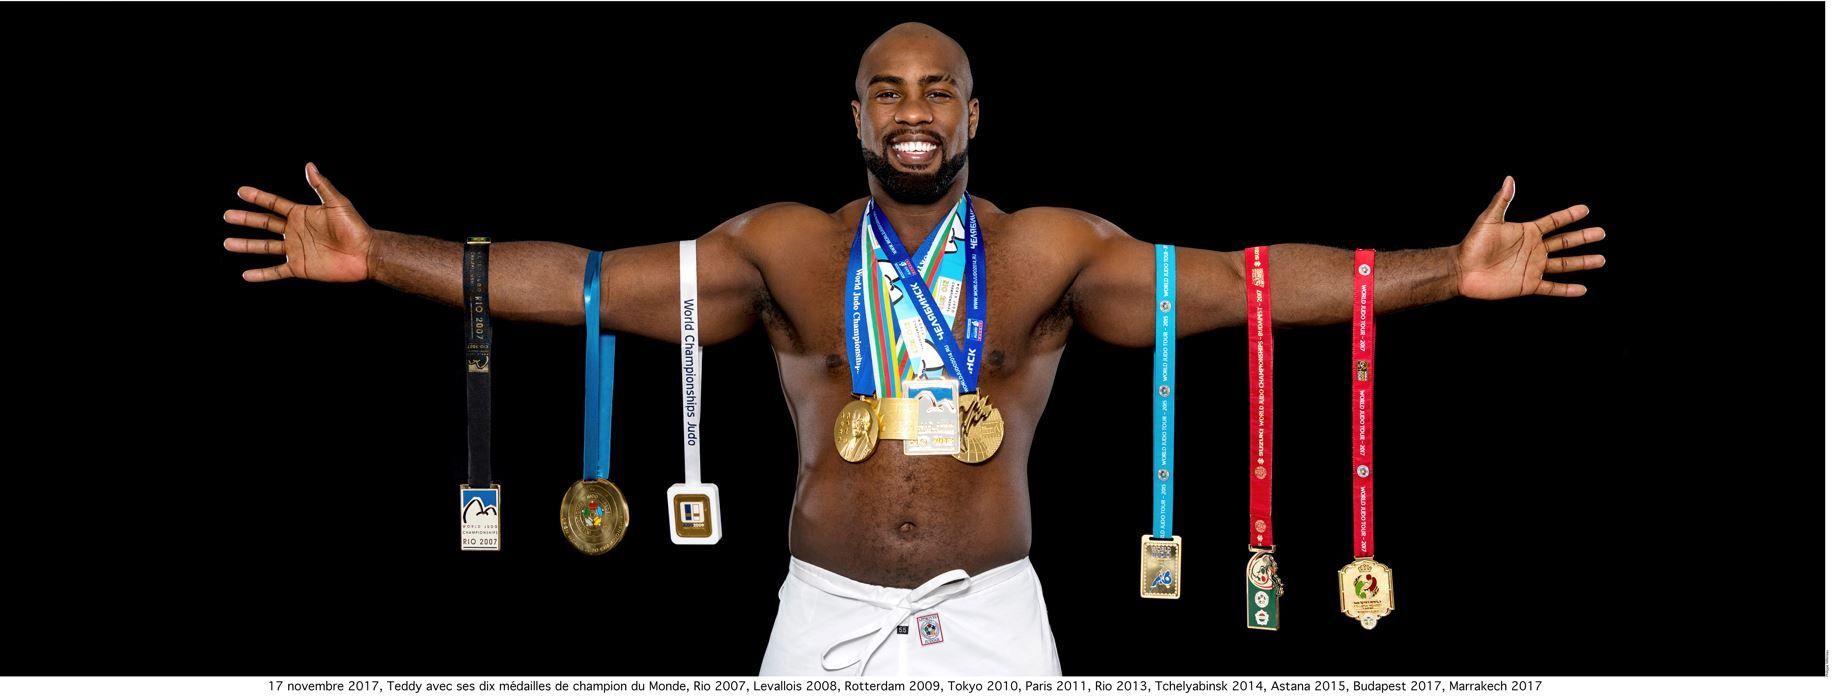 Teddy RINER Photo print*: Teddy Riner and his ten World Champion medals, 17 Nove&hellip;